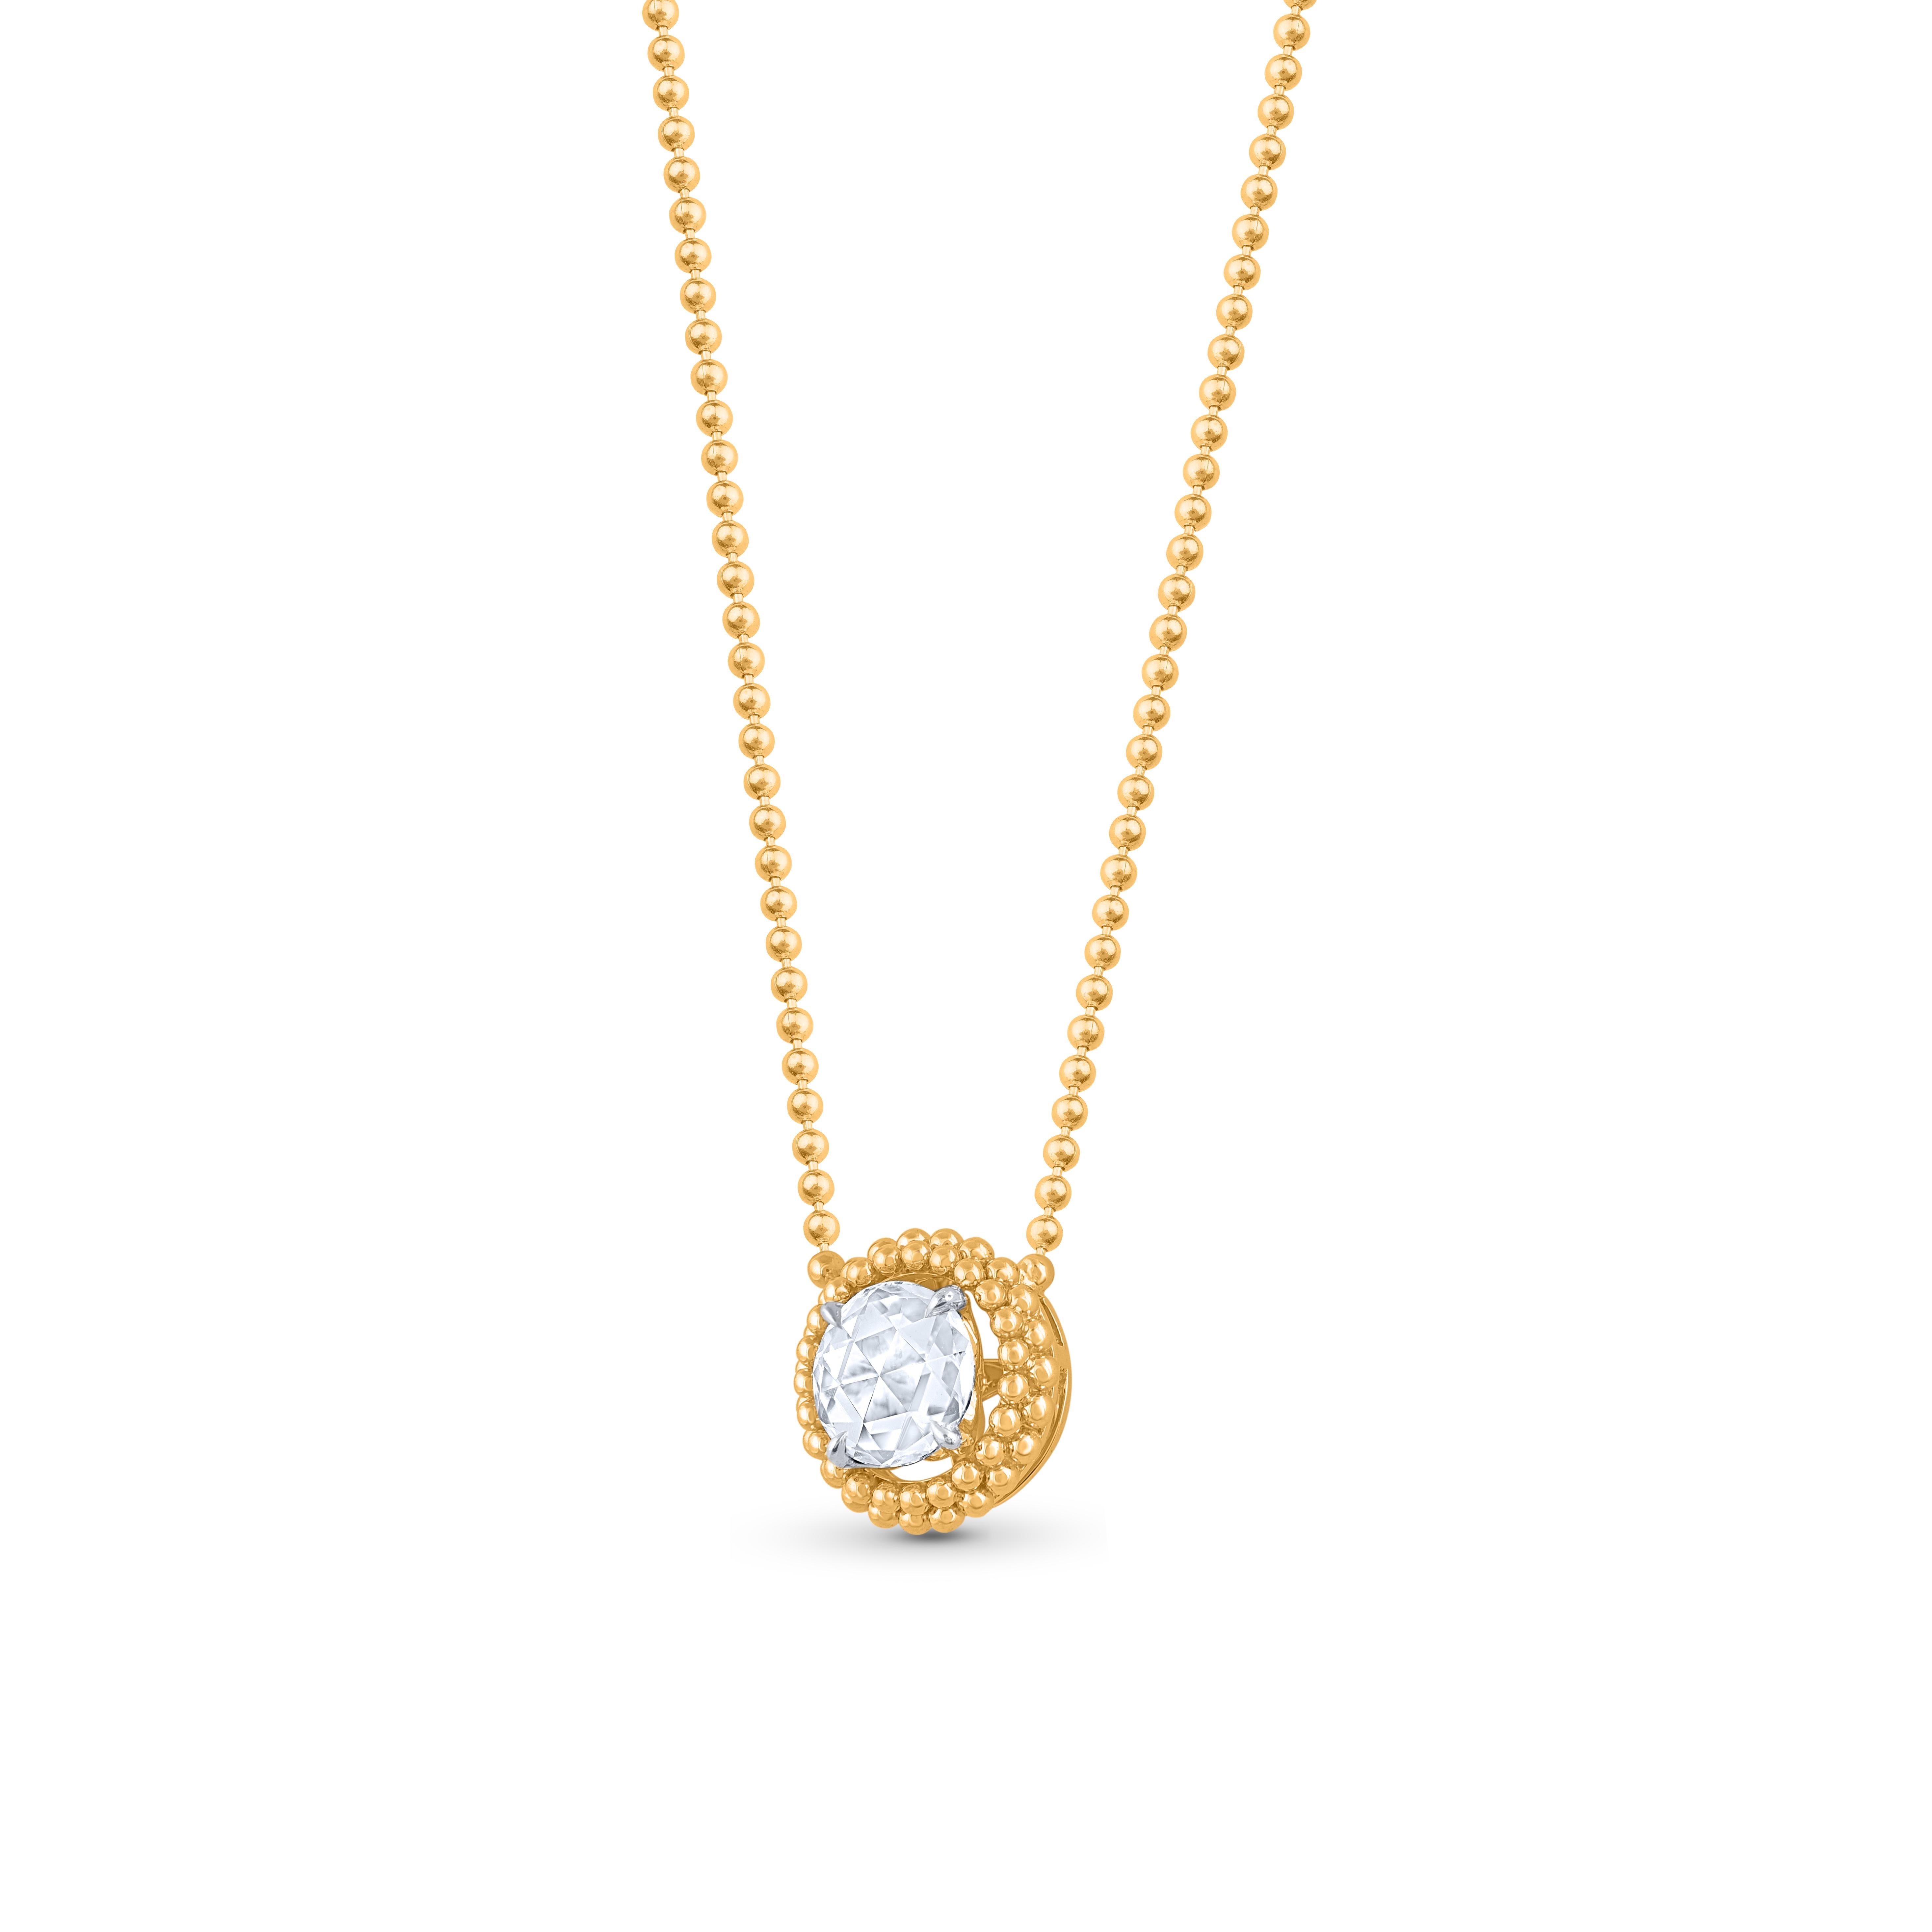 An elegant Sunlight Pendant consists of a rose cut diamond enhanced with an outer pota ring. The complete look of the pendant is accentuated with the ancient pota technique which is an integral part of our Sunlight Collection.  Each little bead